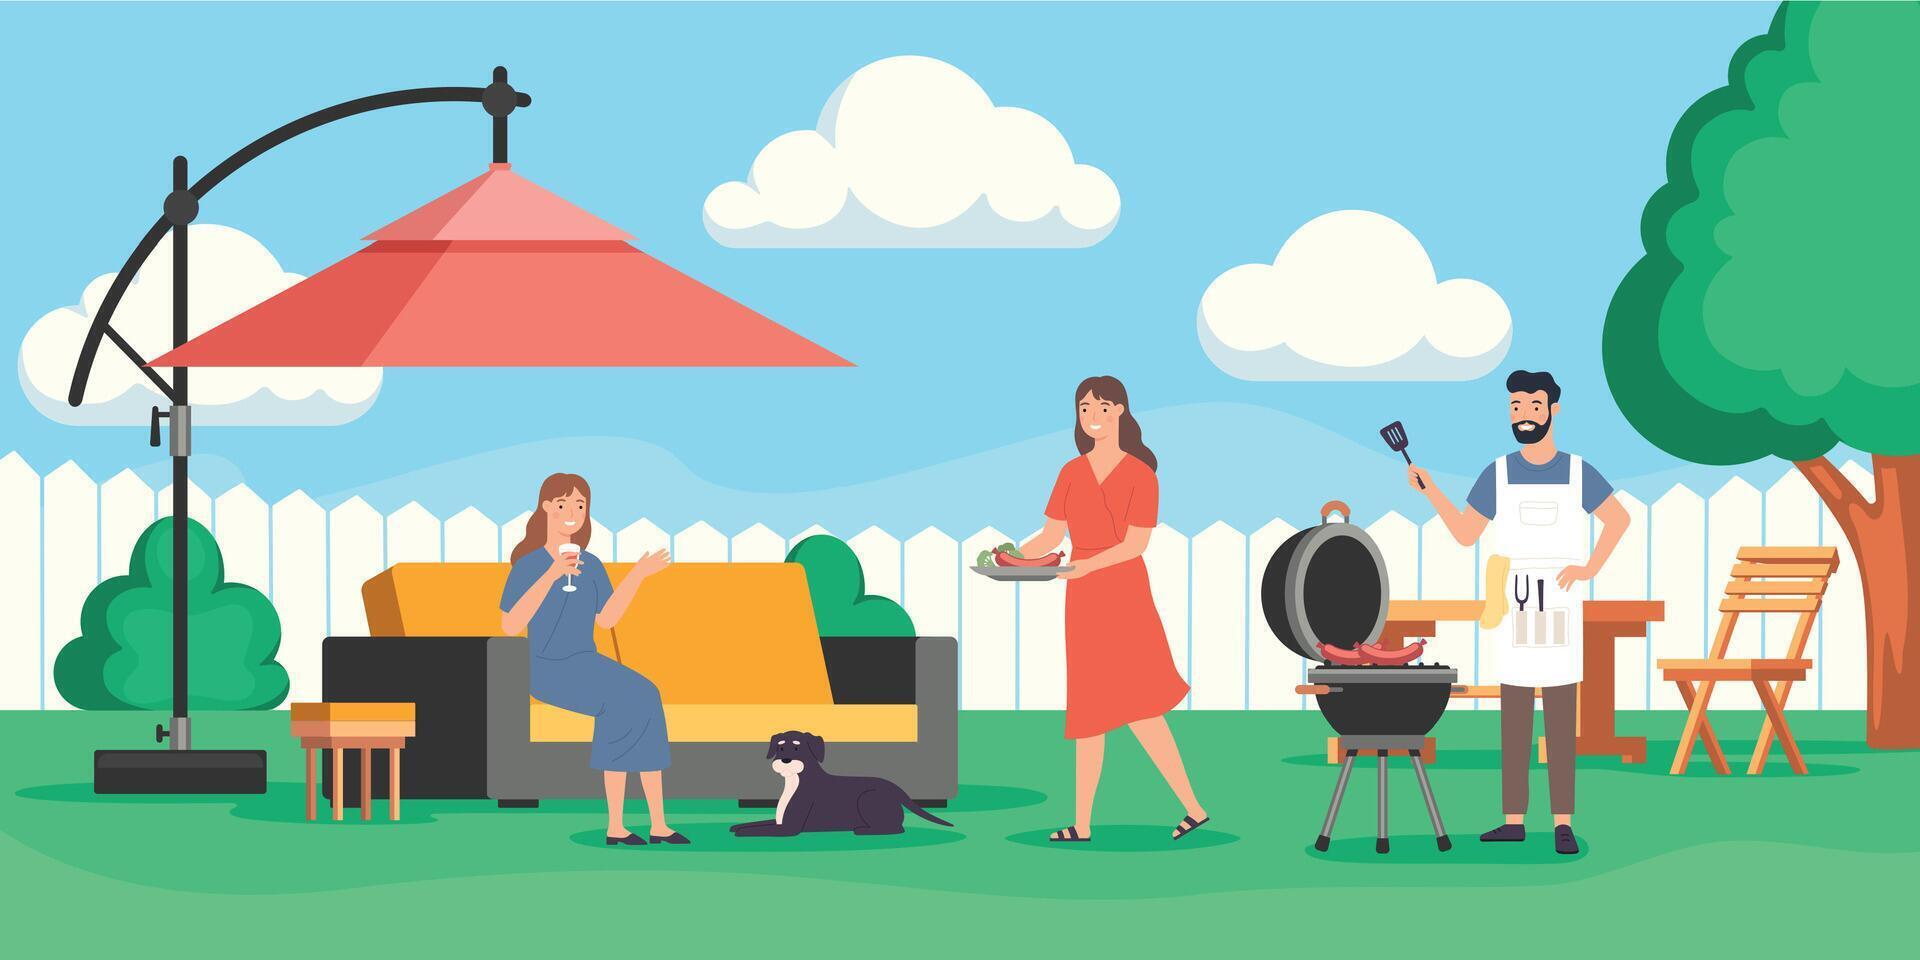 Family party with barbecue. Man grilling sausages outdoor. Wife serving dinner to female friend. Girl relaxing vector